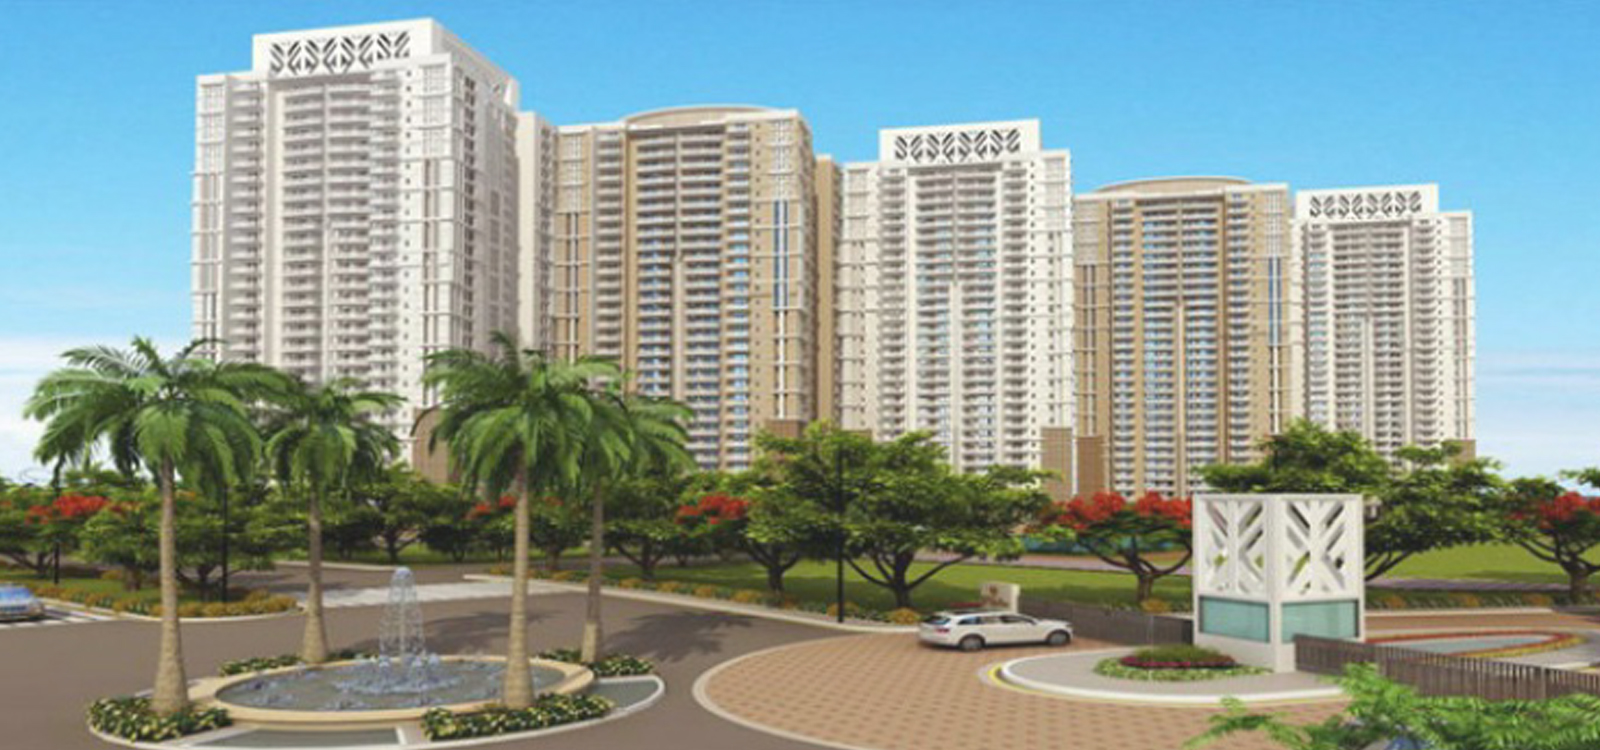 Why DLF Park Place Sector 54 Gurgaon is the Ideal Home